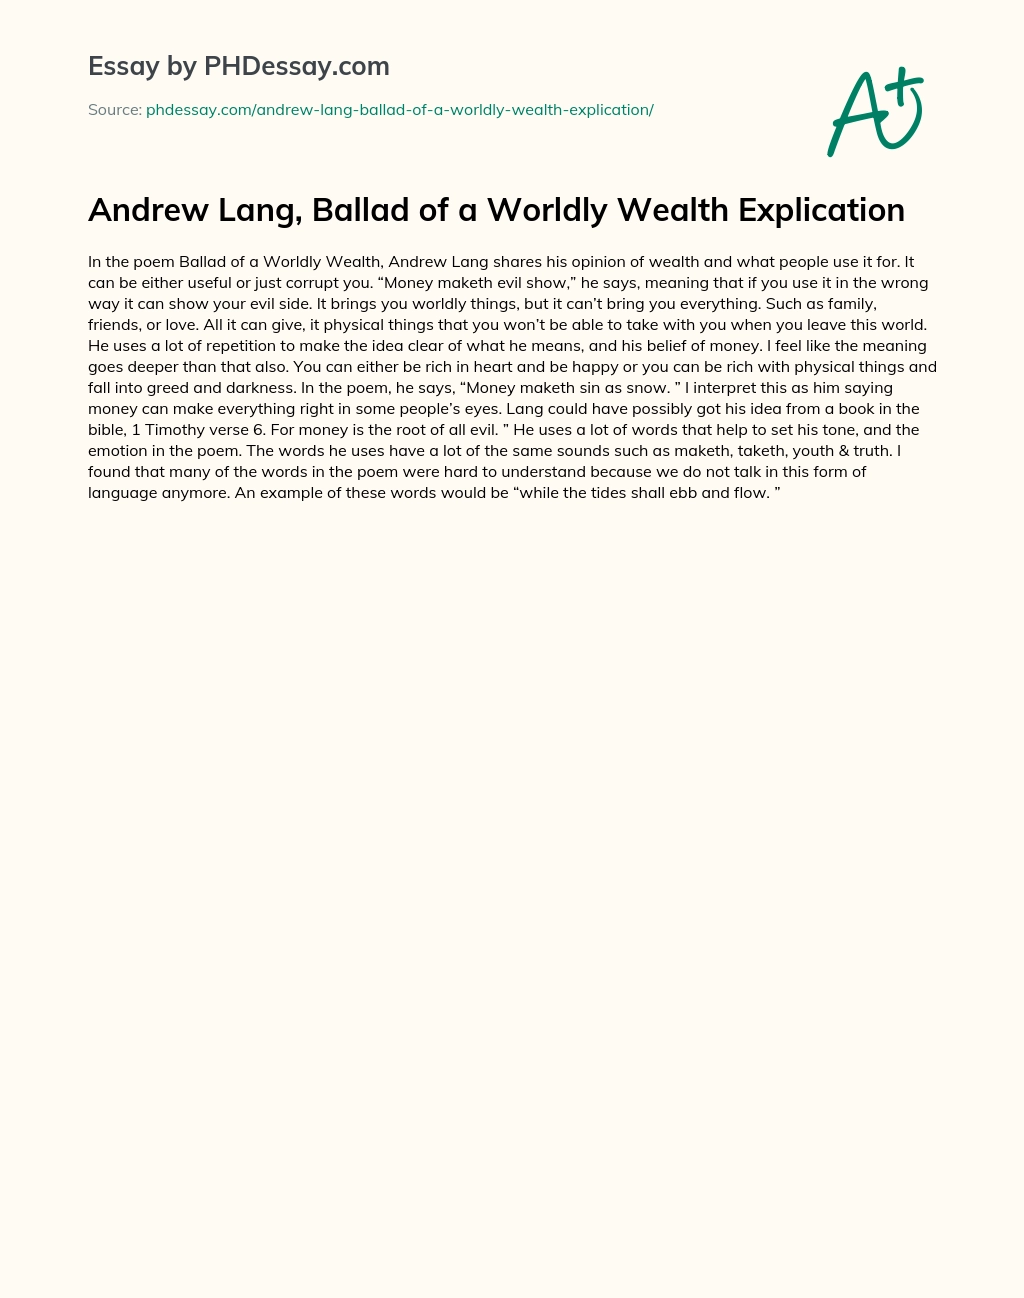 Andrew Lang, Ballad of a Worldly Wealth Explication essay